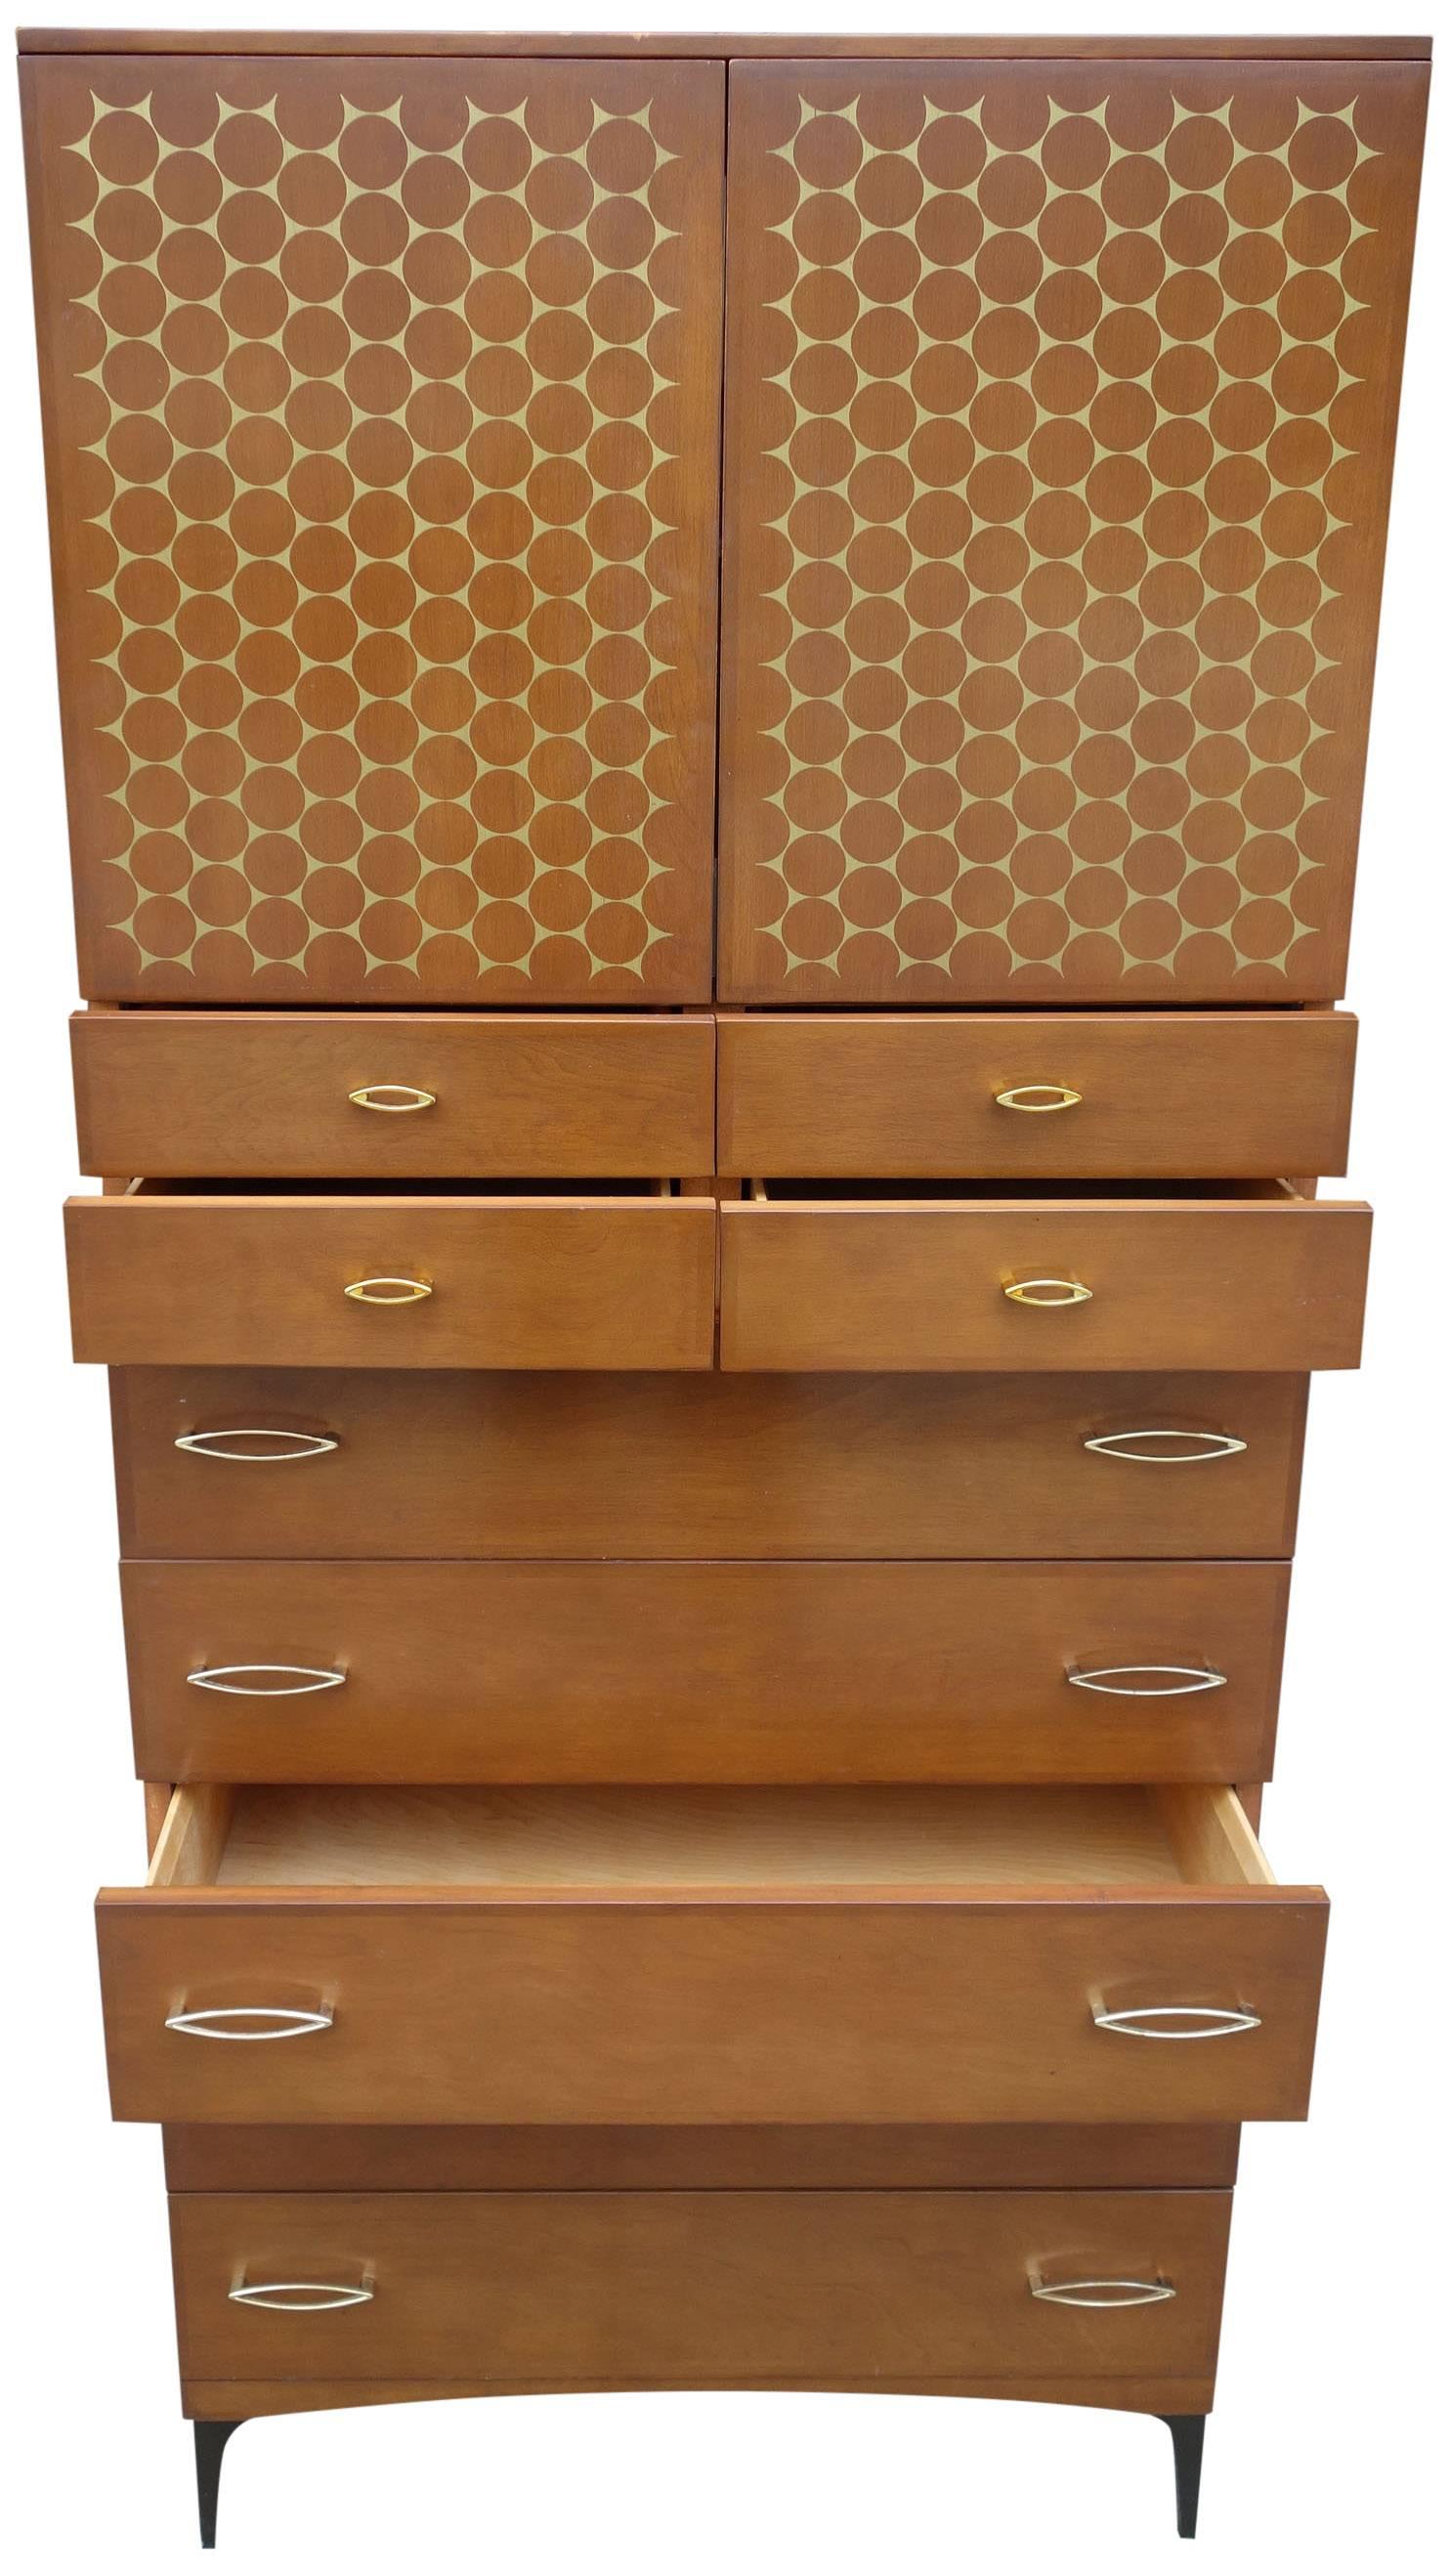 Said to be produced for only one year in 1959, the Contessa Line was a strong departure from the blonde wood they are known for. Featuring cherry brown finish with gold accents on metal legs. This rare midcentury wardrobe features four smaller